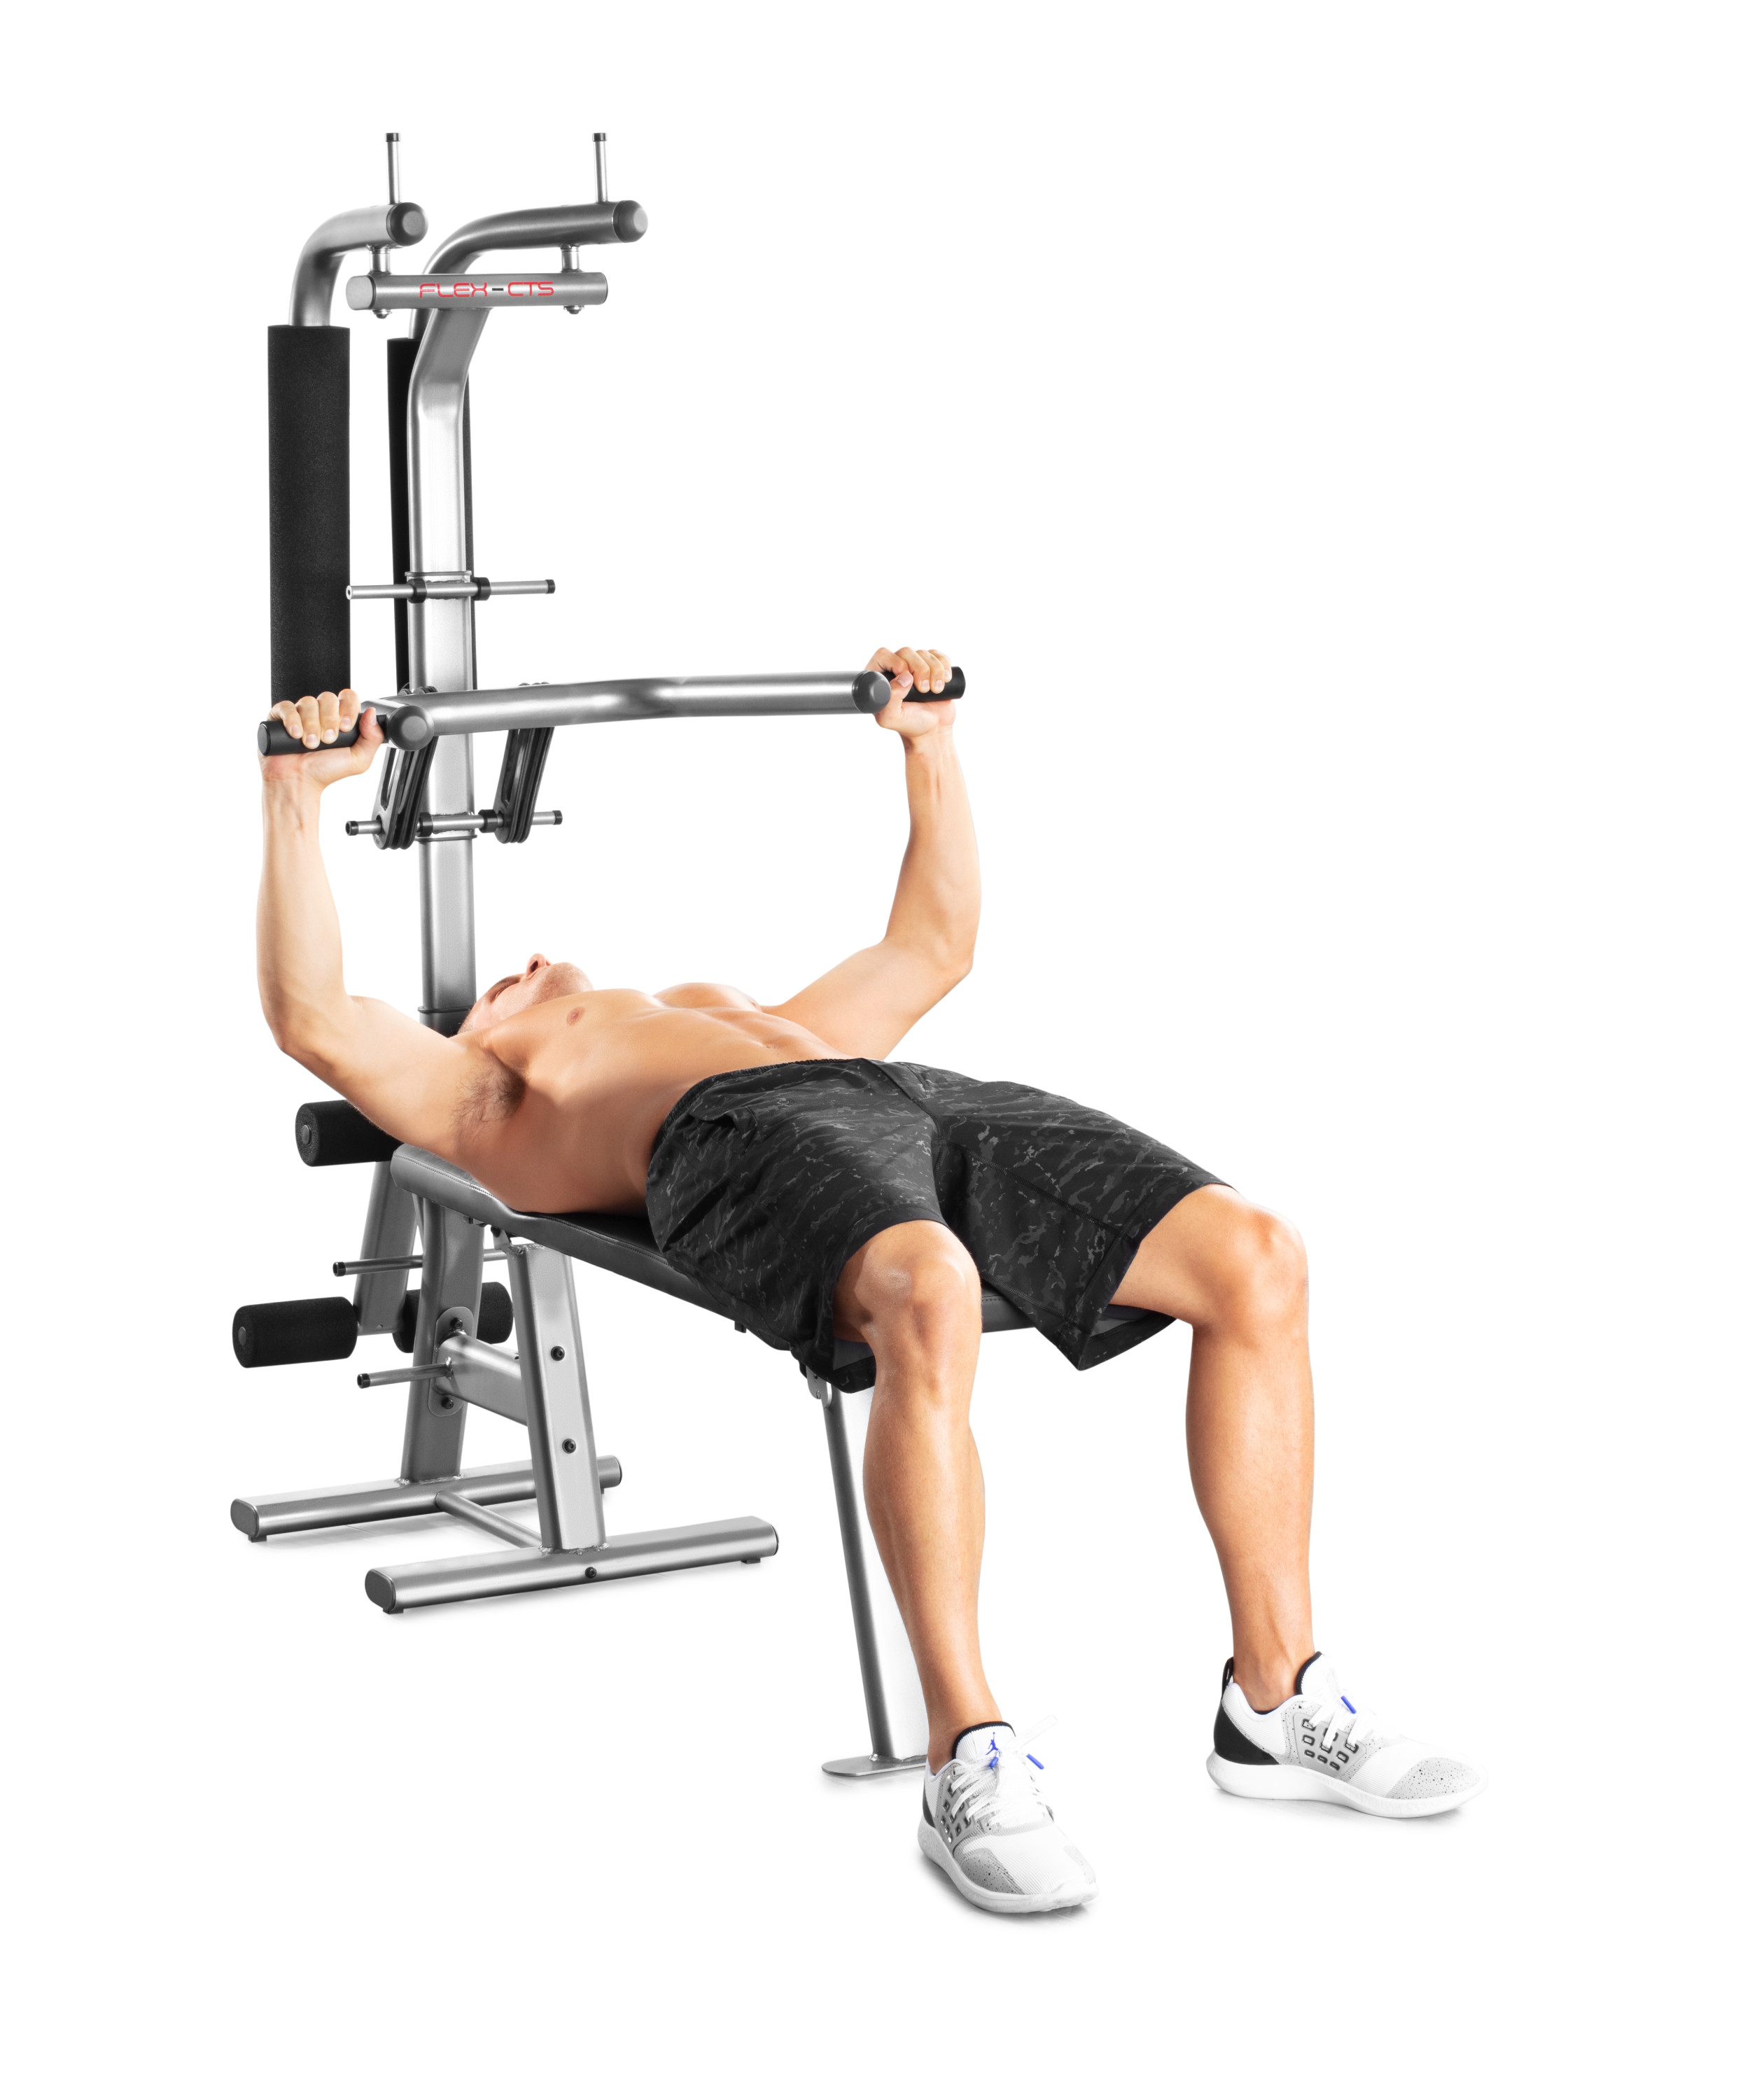 Weider Flex CTS Home Gym System with 14 Resistance Bands and Professionally-Designed Excercise Chart - image 9 of 11